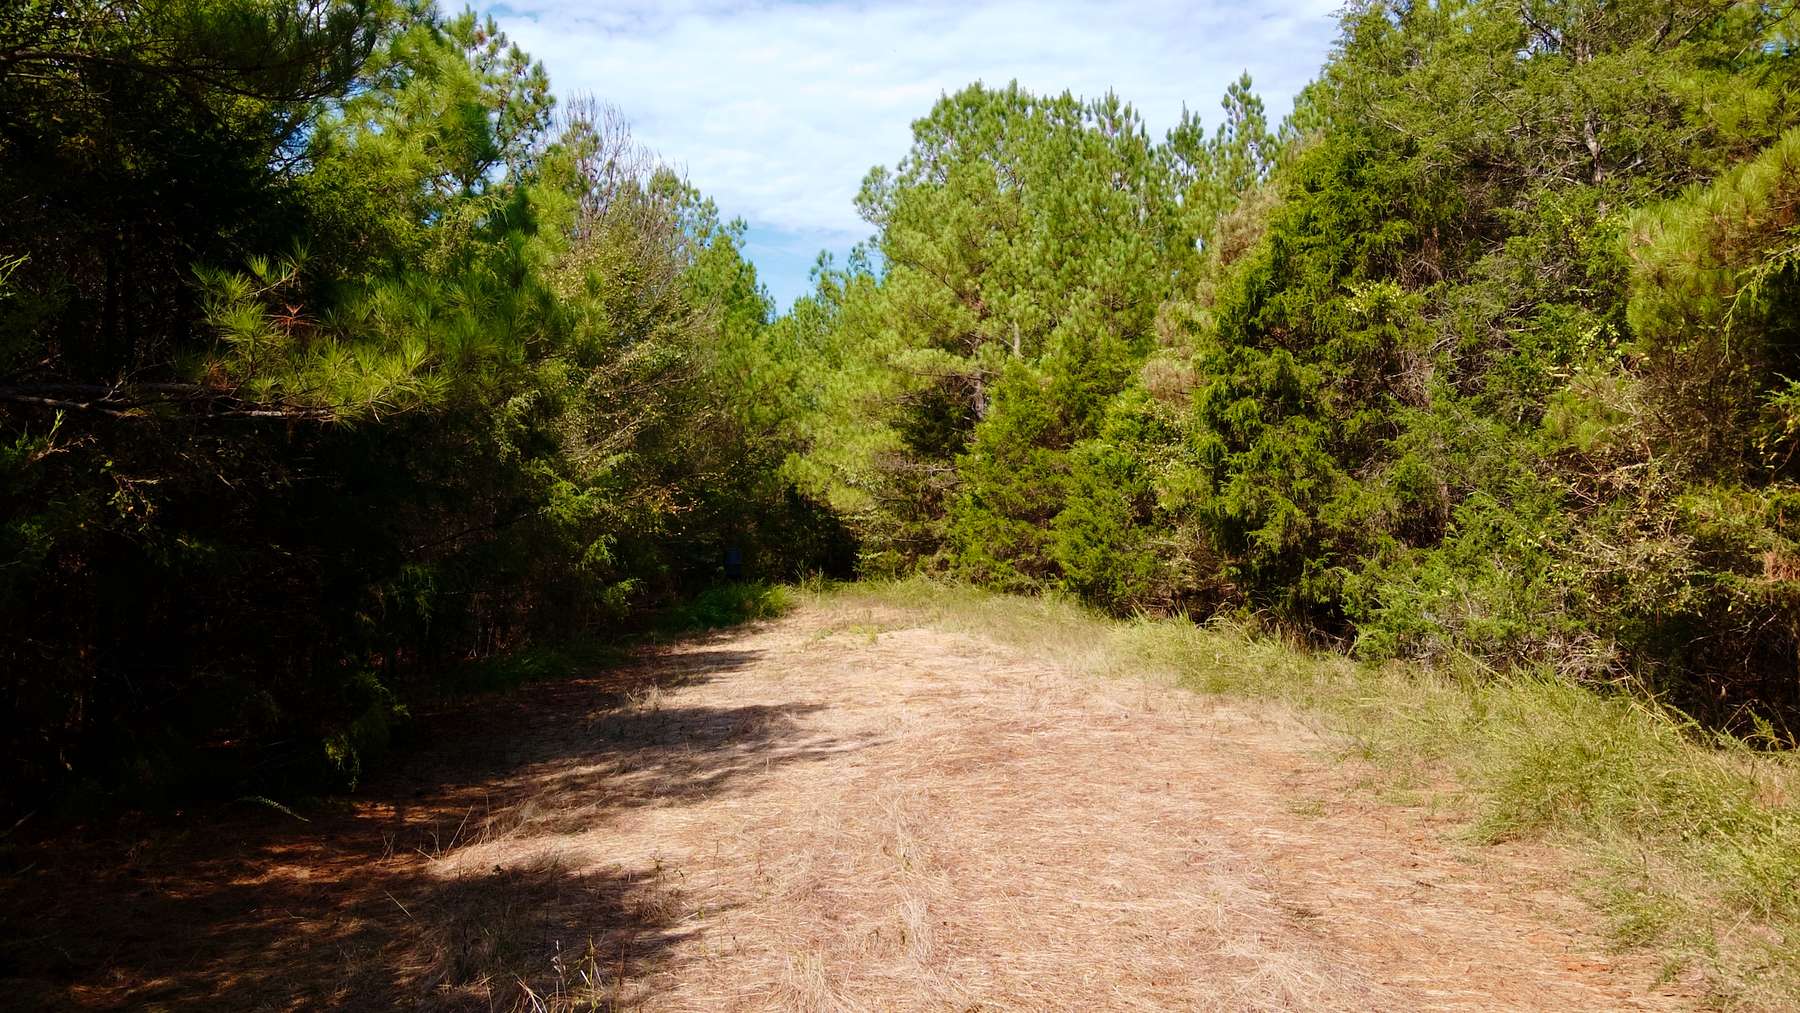 206 Acres of Recreational Land for Sale in Chester, South Carolina